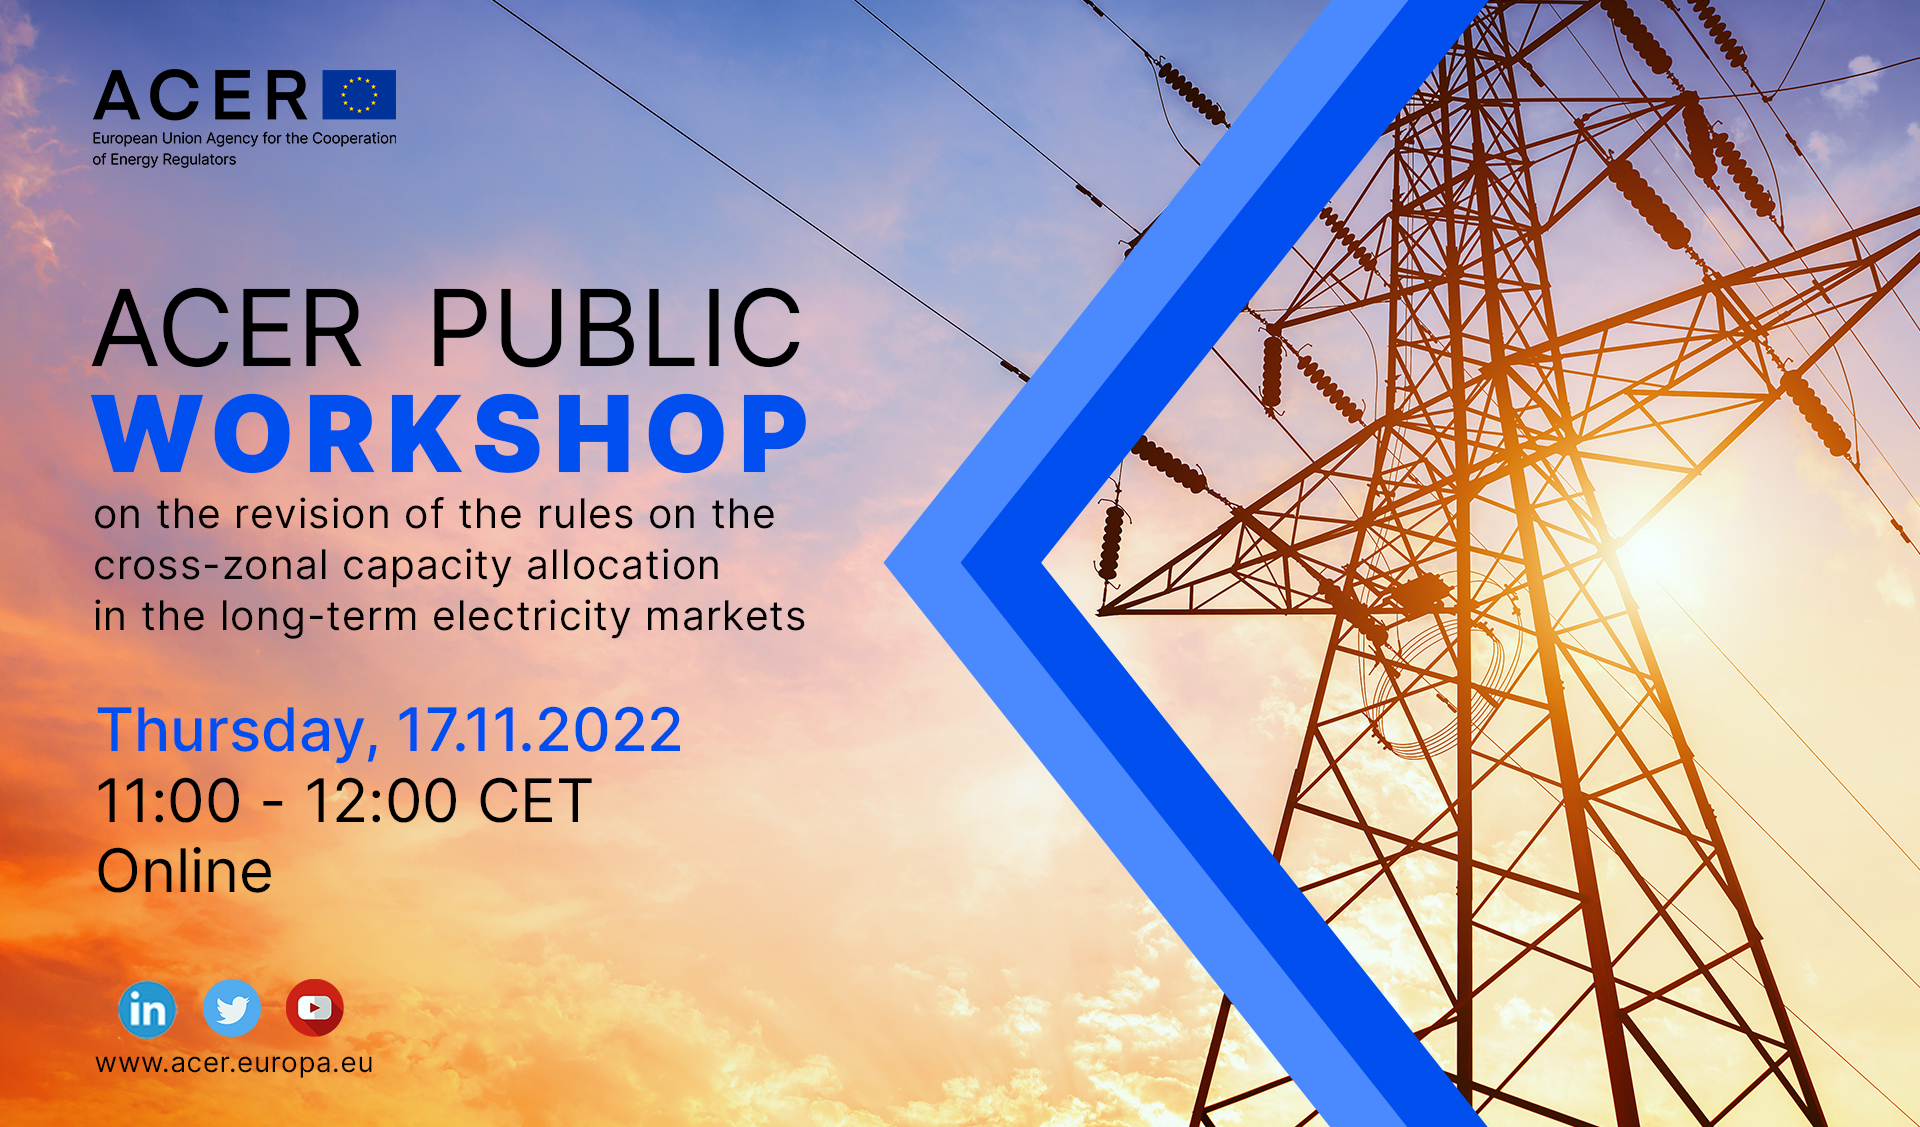 ACER Public Workshop on the revision of the rules on the cross-zonal capacity allocation in the long-term electricity markets